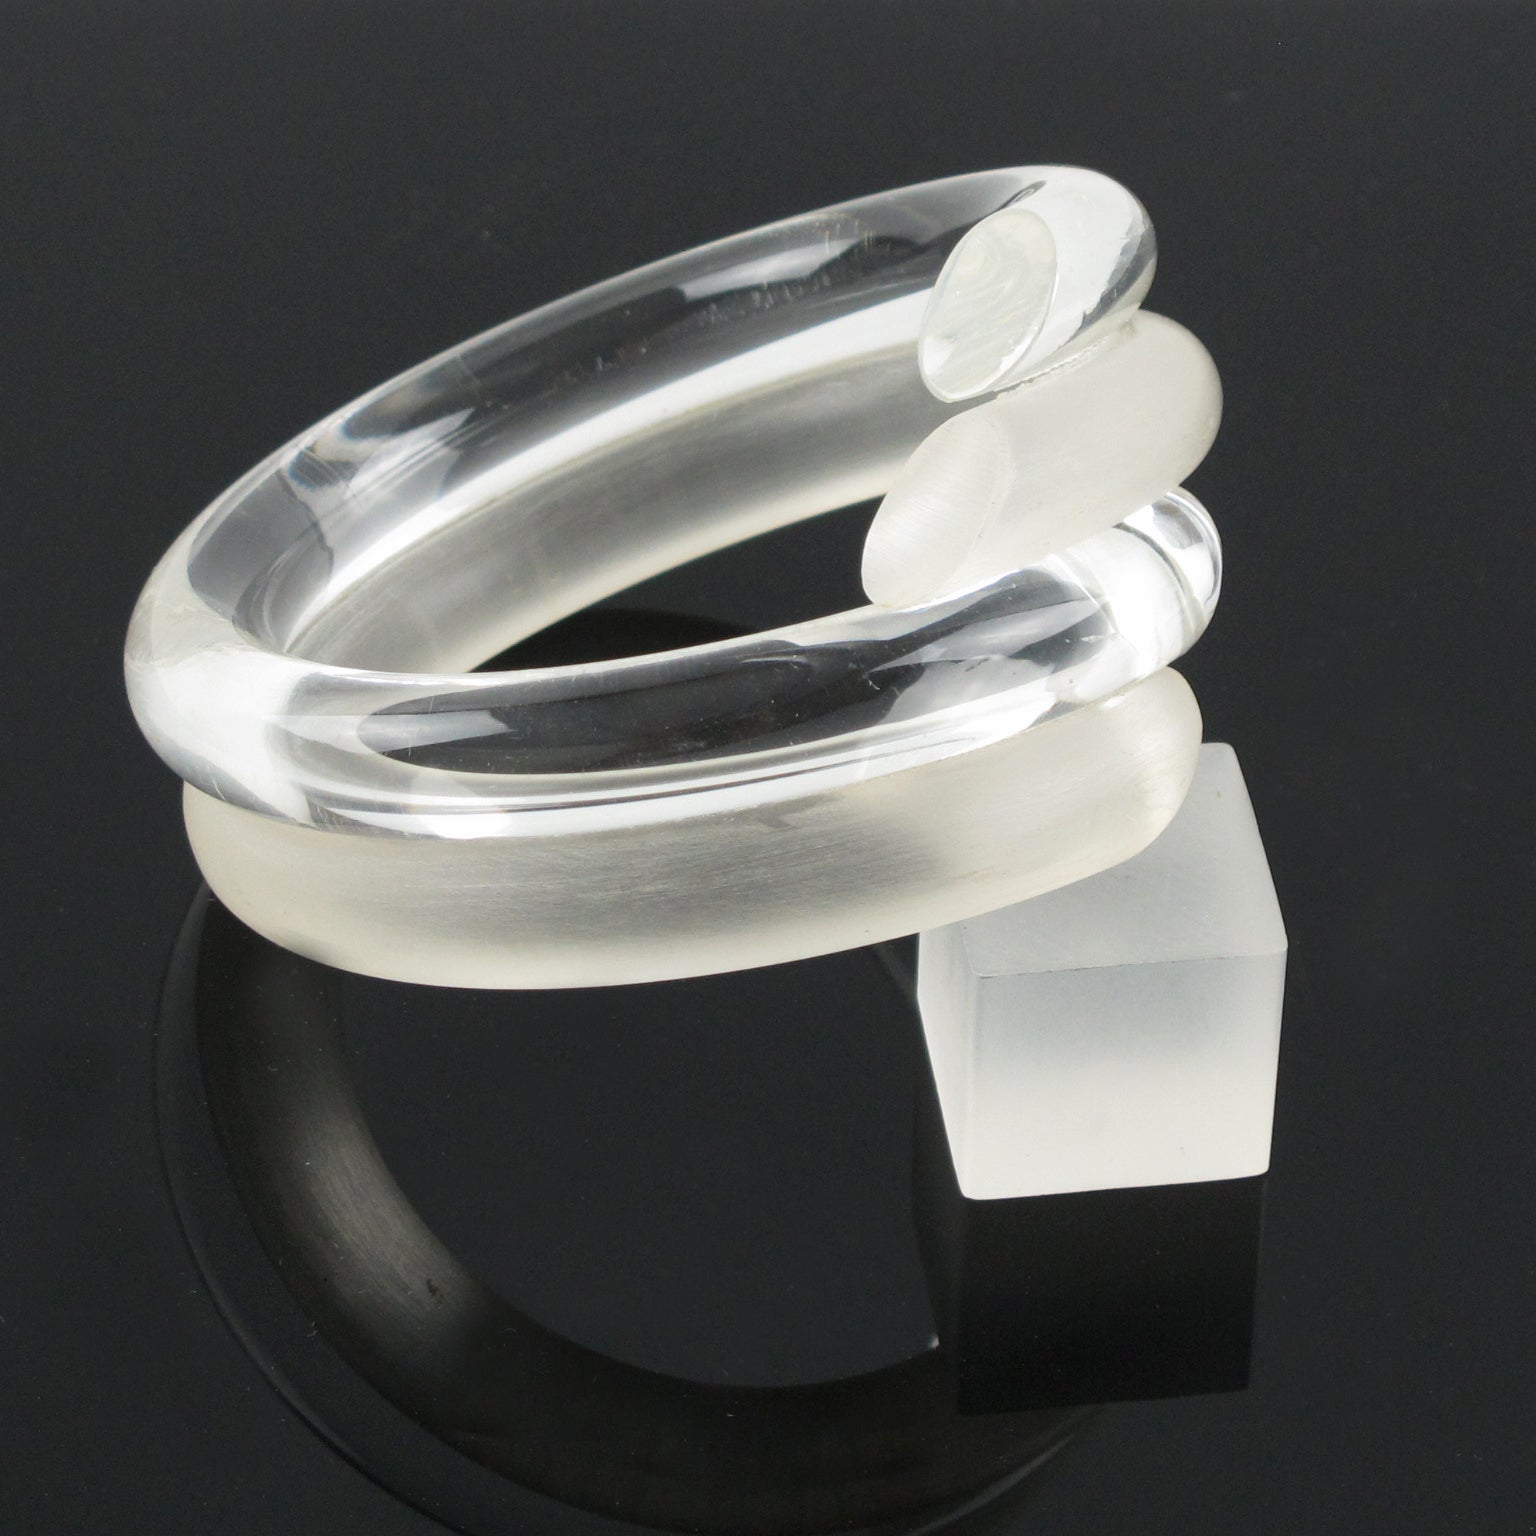 Judith Hendler designed this lovely Lucite or Acrylic bracelet bangle in the 1980s. This bracelet works on a contrast frosted and transparent color with a coiled-wrapped design. 
Judith Hendler is a famous Californian jewelry designer from the